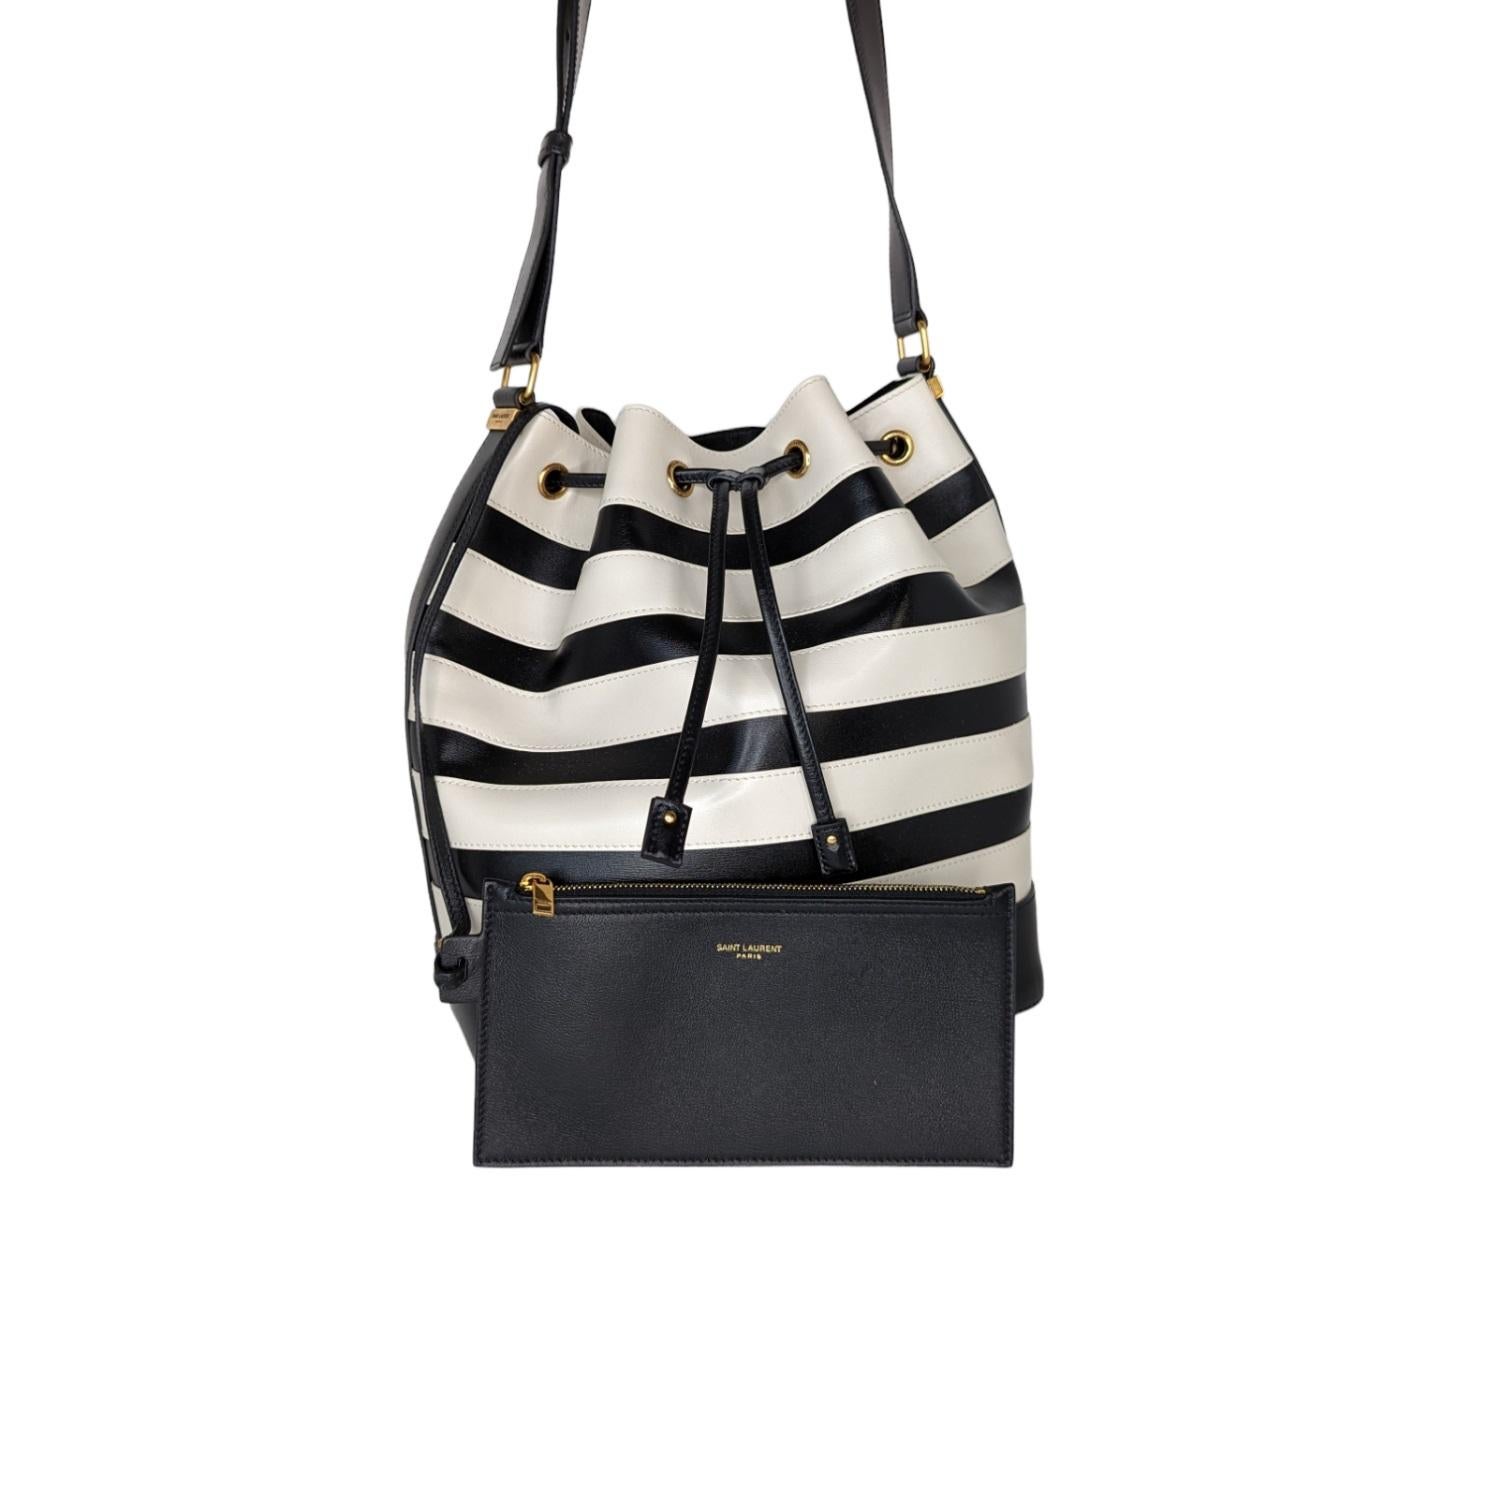 This Saint Laurent black and white stripe tote is crafted of smooth calfskin leather. This bag features a black leather drawstring closure and black top strap with gold hardware. The top opens to a spacious leather interior. The softly structured